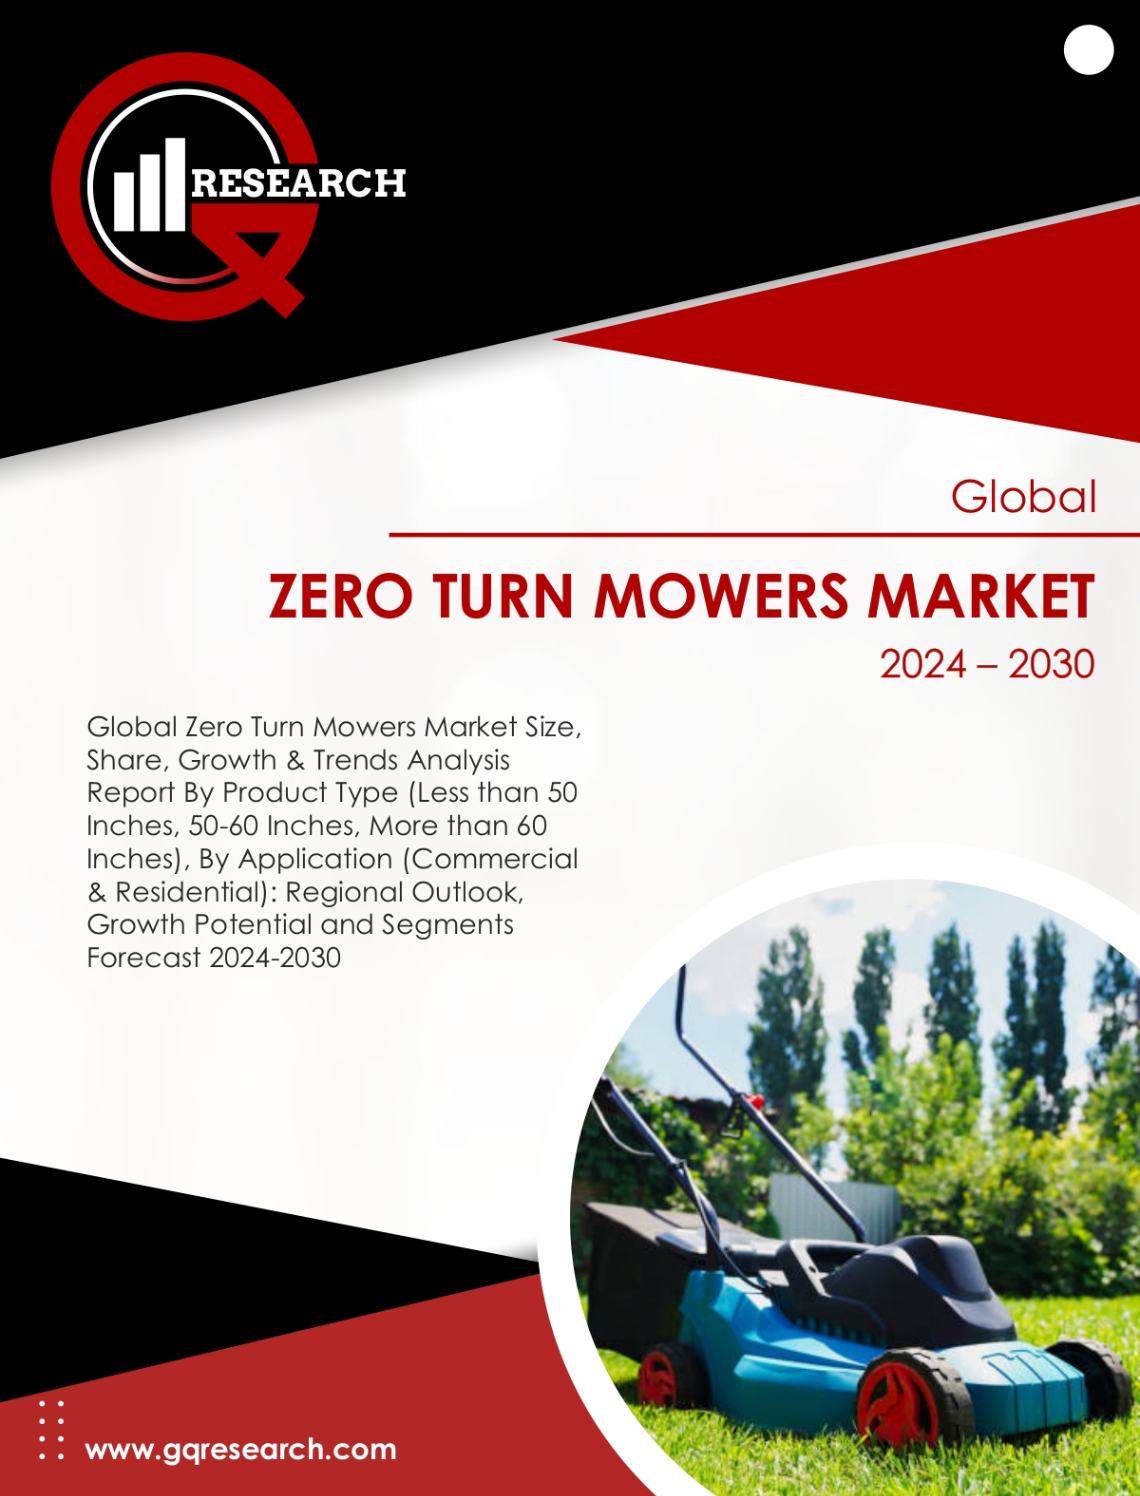 Zero Turn Mowers Market Growth Analysis by Size, Share & Forecast to 2030 | GQ Research